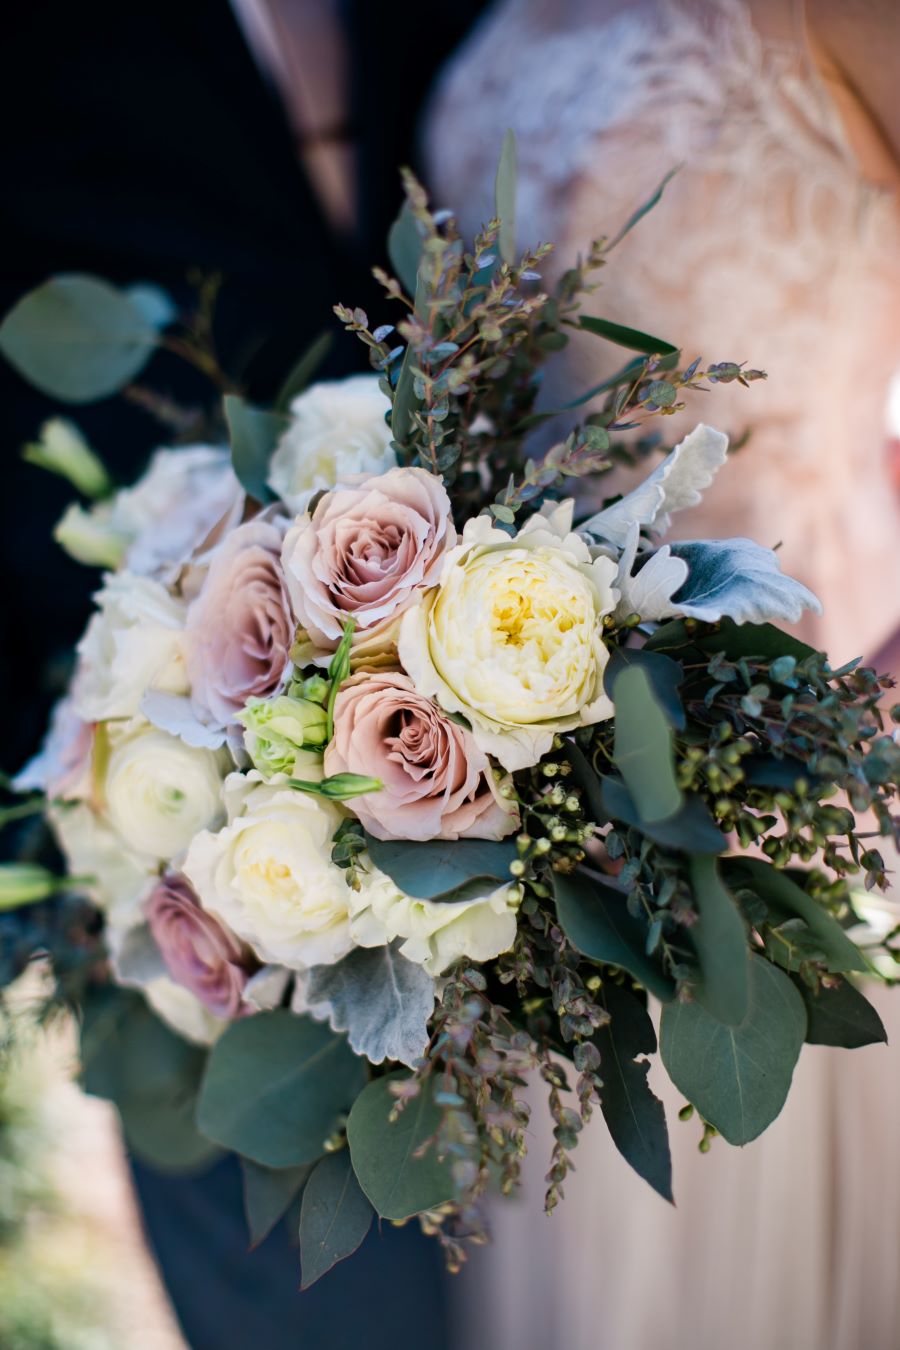 Close up of bride's bouquet / Elopement / Spring / March / Dusty Rose